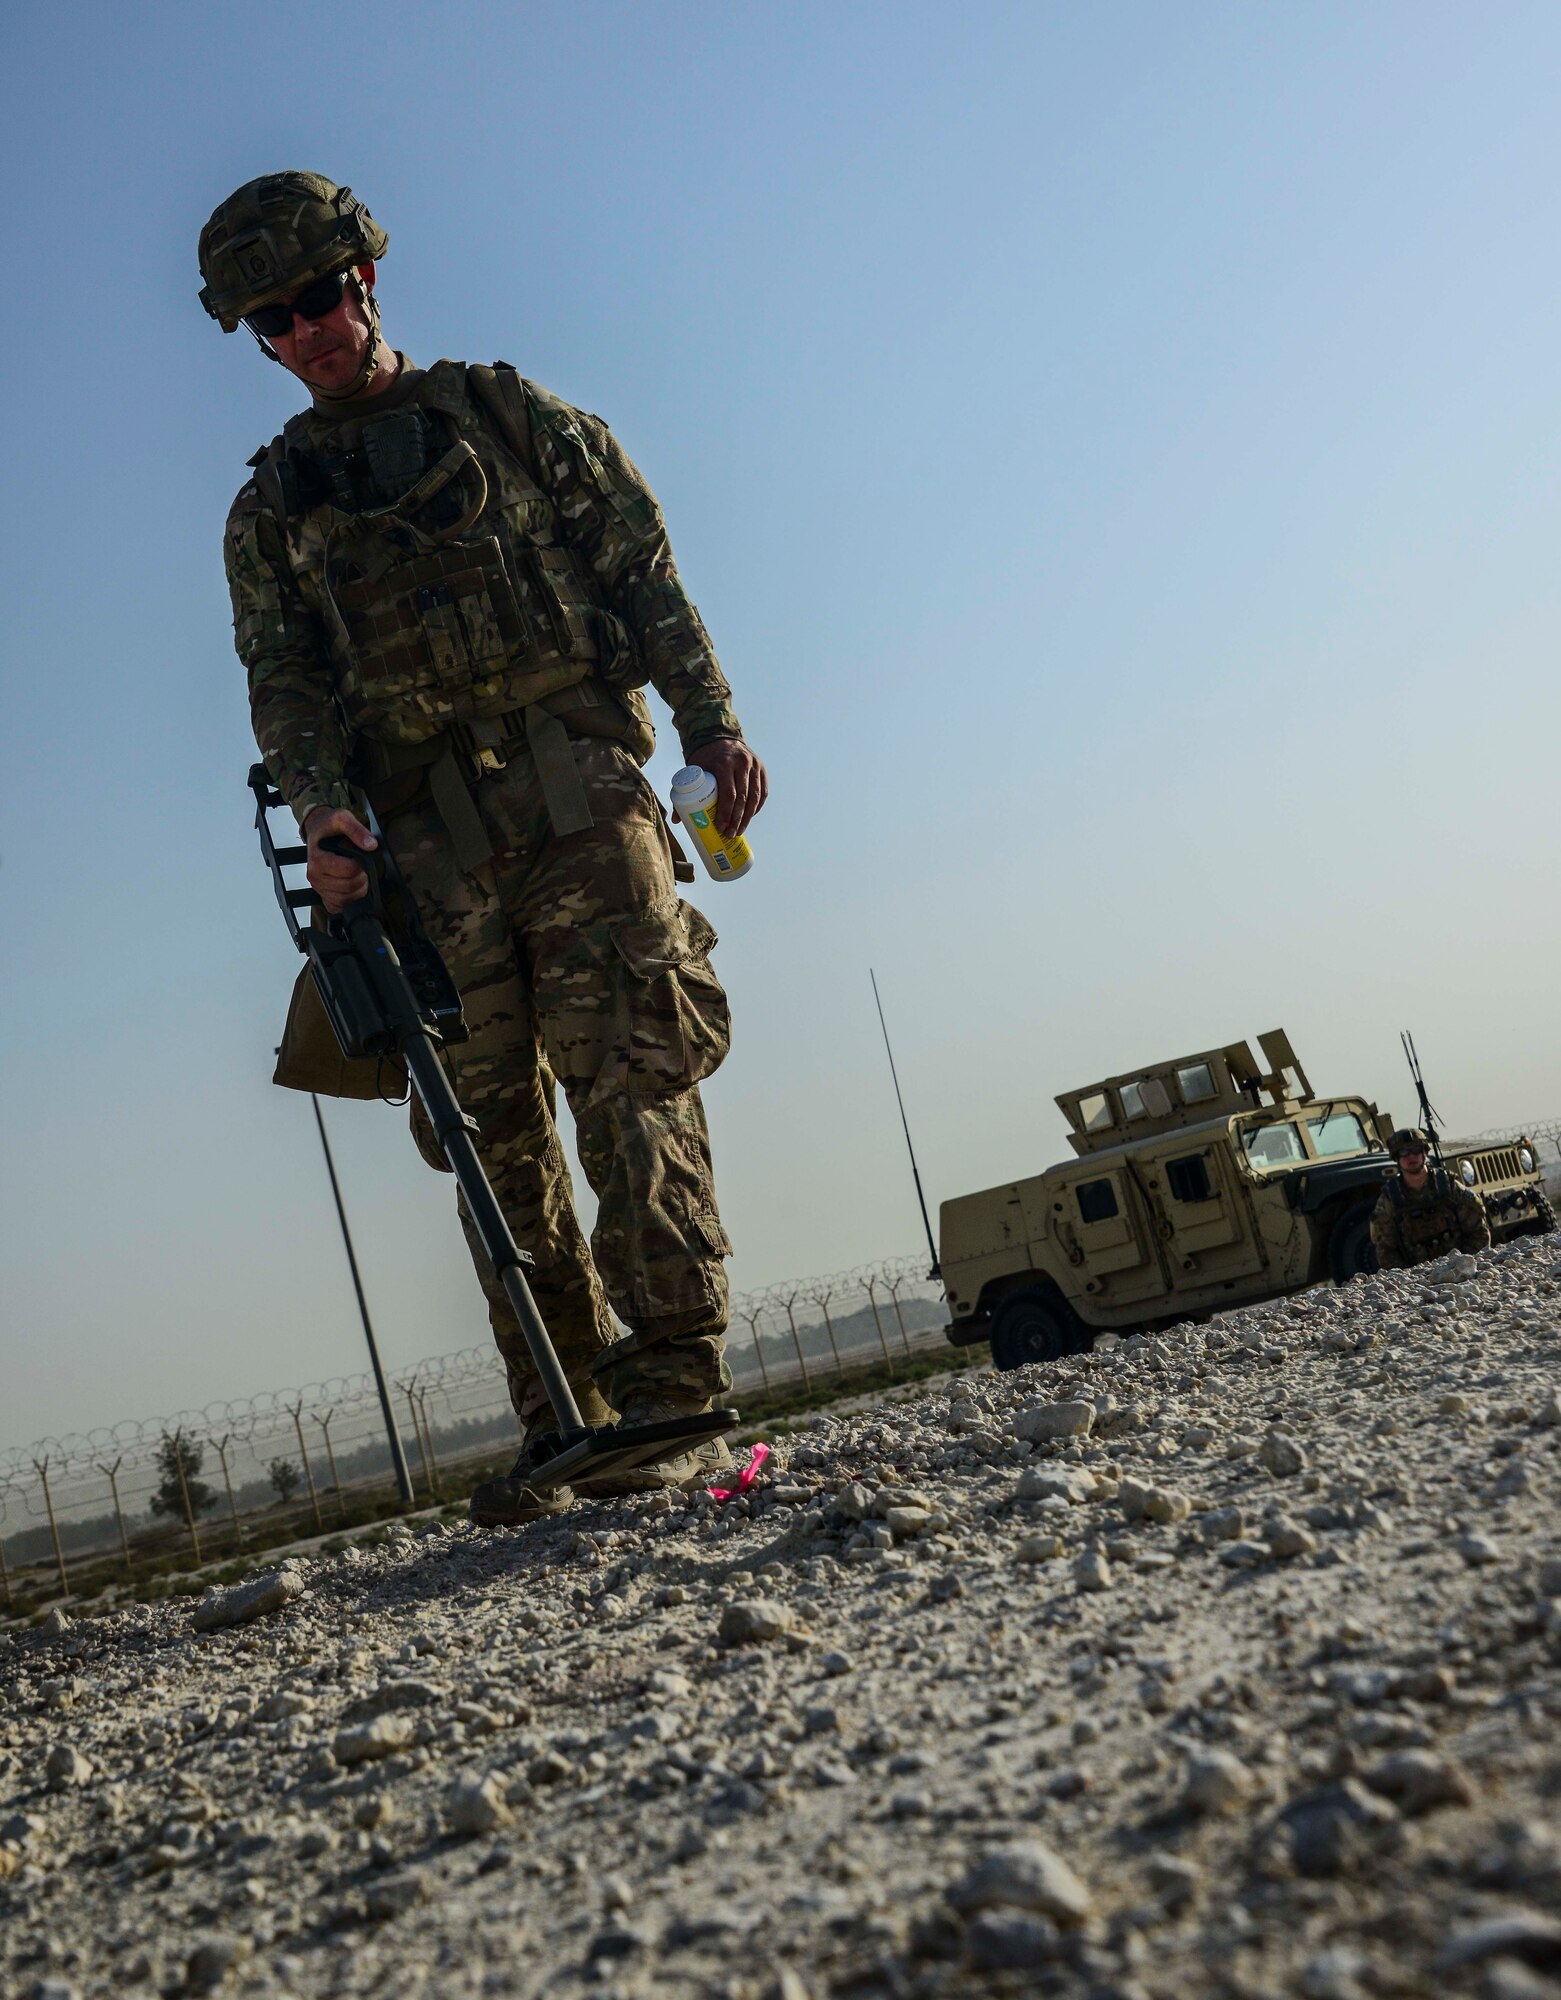 Tech. Sgt. Kelly Badger, 379th Expeditionary Civil Engineer Squadron explosive ordnance disposal craftsman, uses a compact metal detector to interrogate an improvised explosive device he detected during a training exercise May 19, 2016, at Al Udeid Air Base, Qatar. Badger said he chose to join the U.S. Air Force and EOD flight to save lives, even if it meant putting his own at risk. (U.S. Air Force photo/Senior Airman Janelle Patiño/Released) 